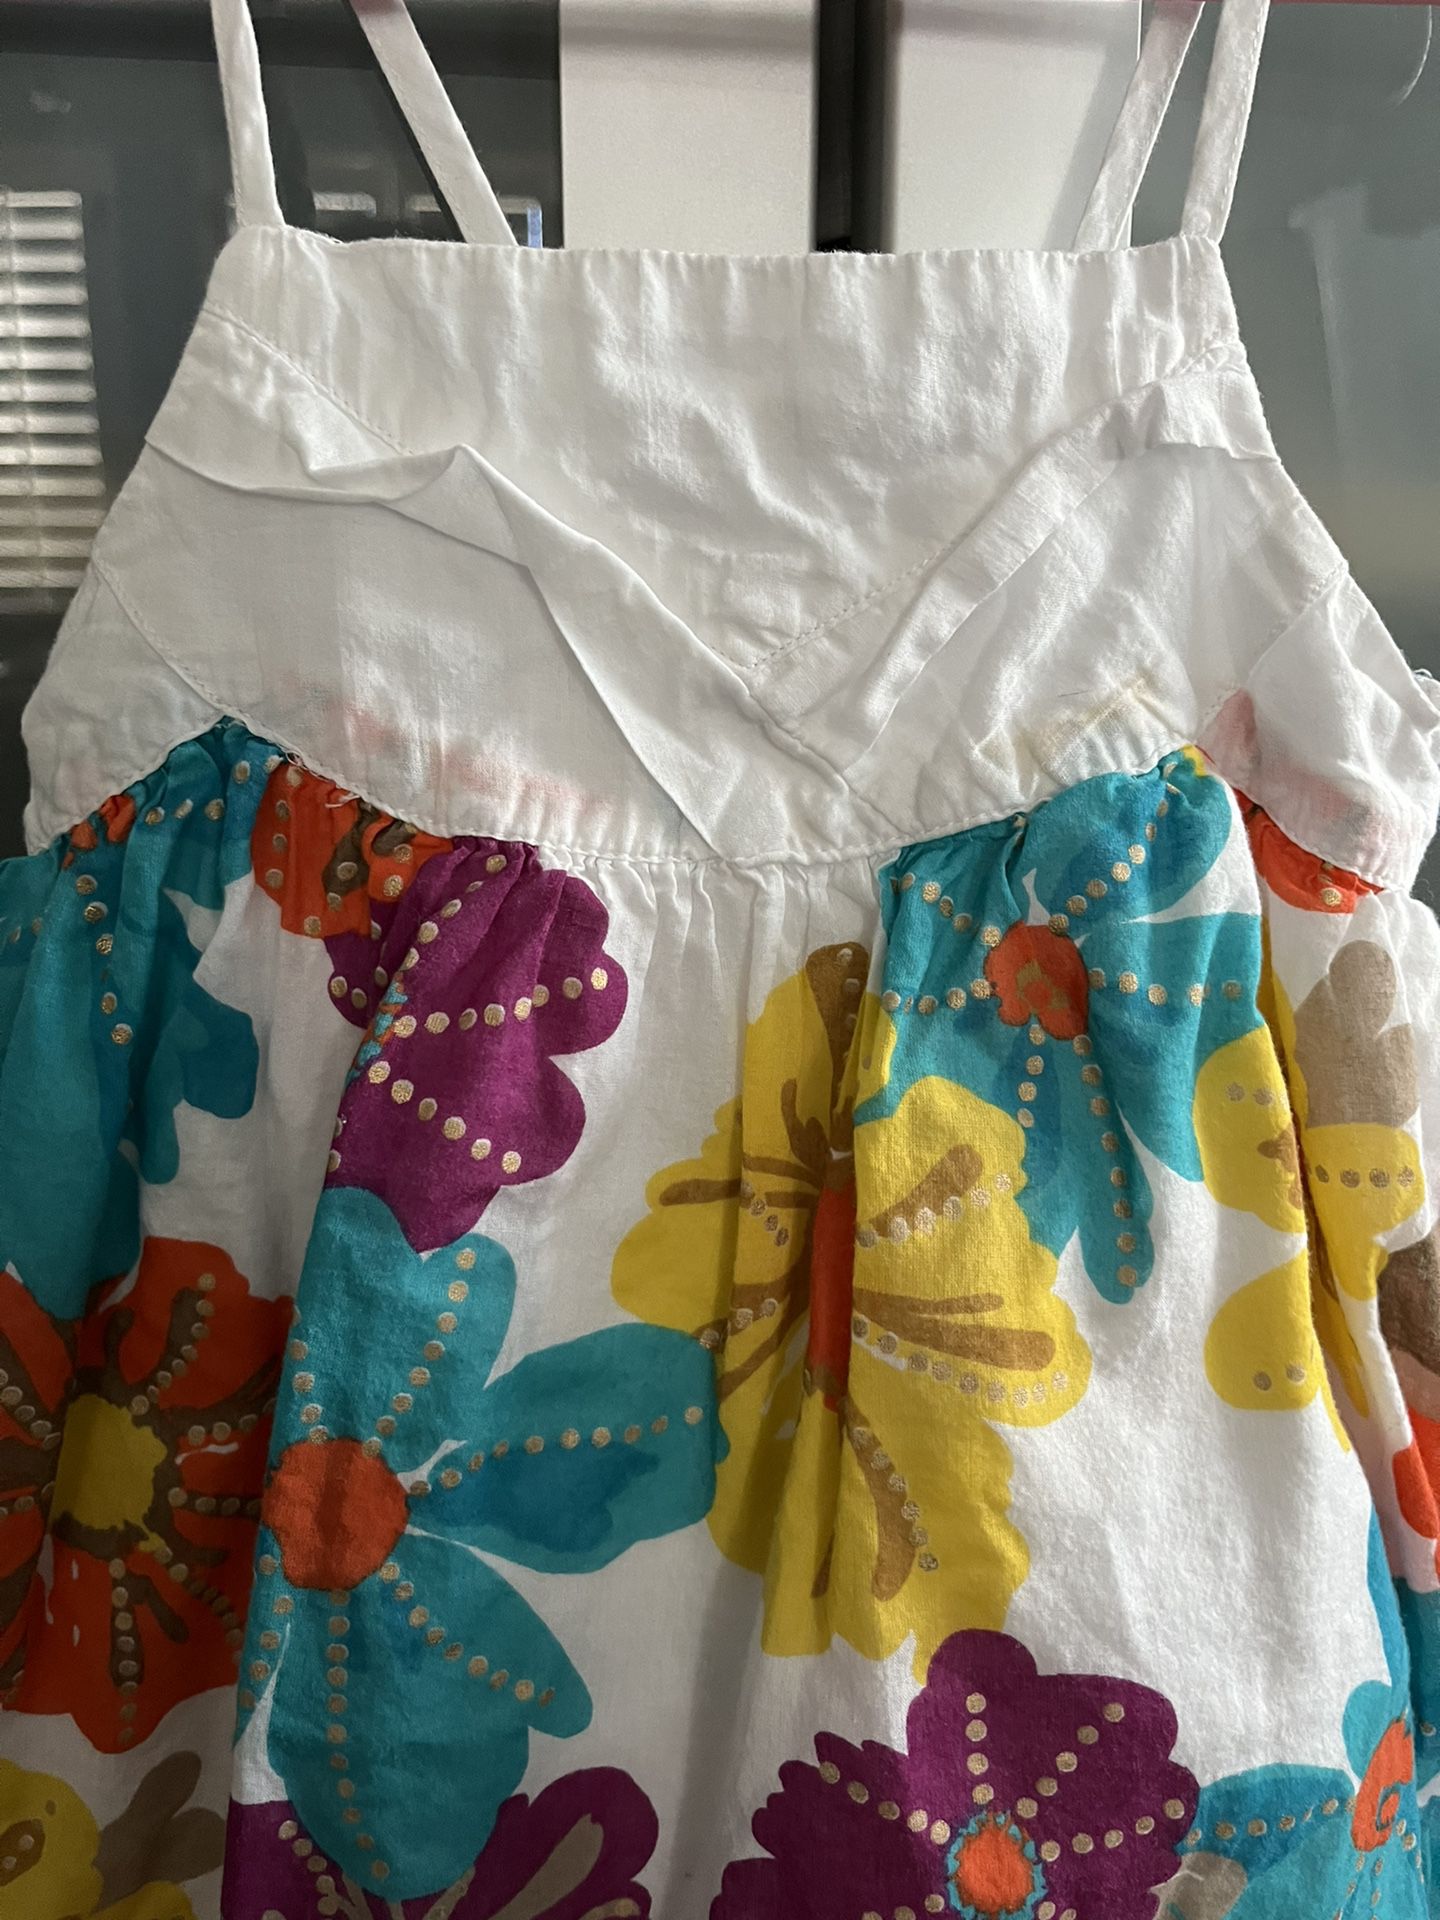 OLD NAVY Girls 3T Sundress Lined Floral Bright 100% Cotton CUTE Multicolored White Ruffle